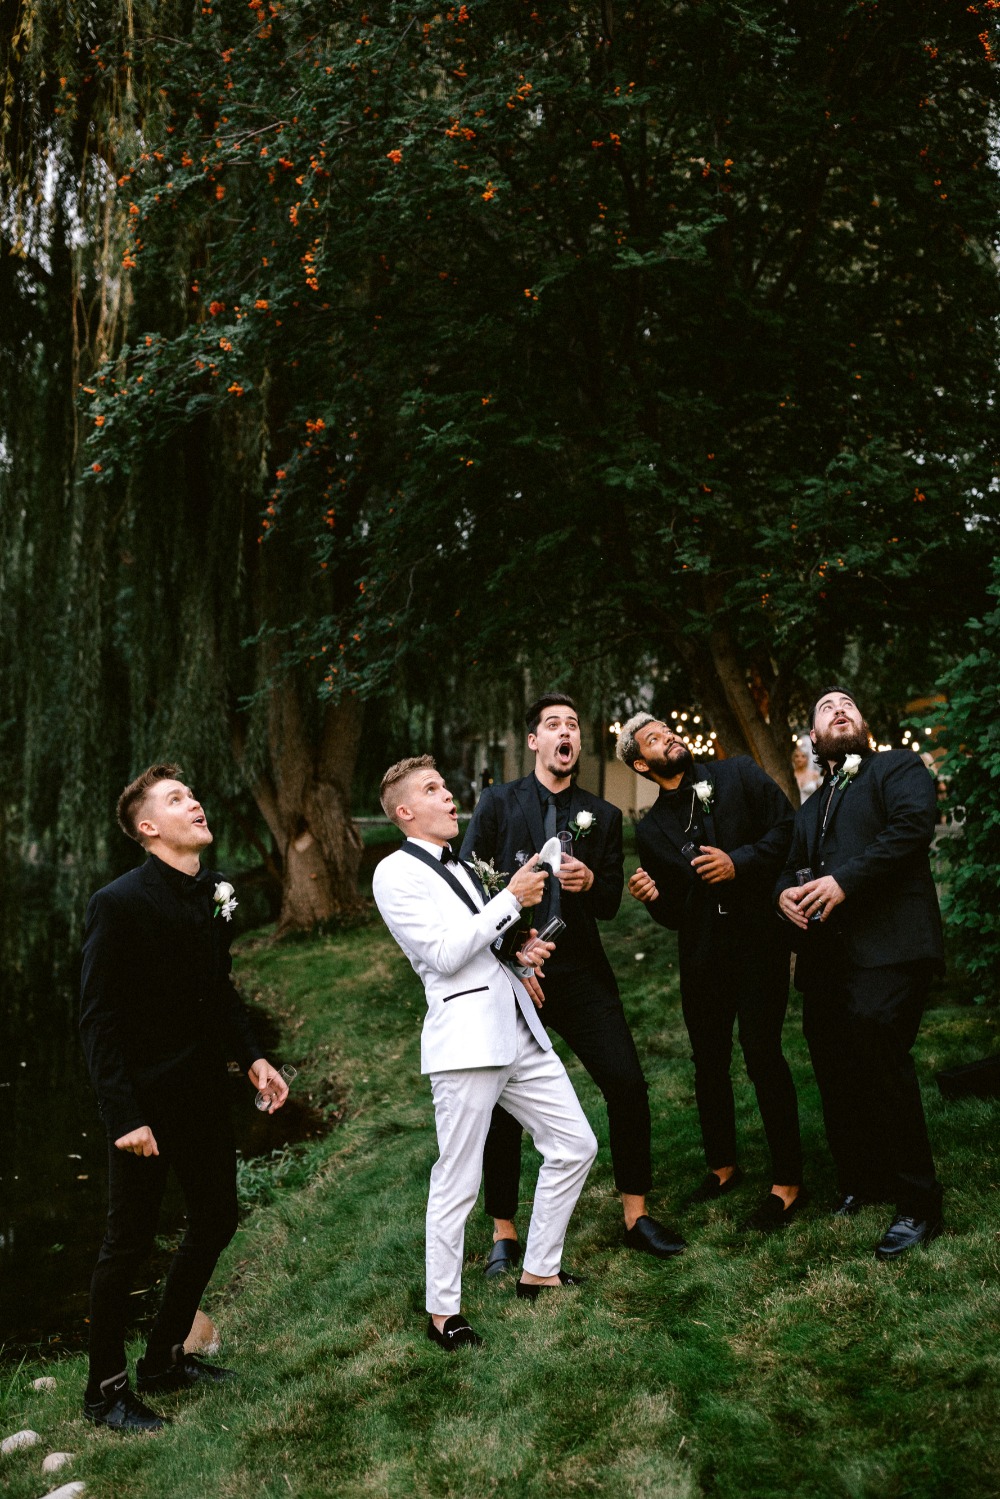 fun photo idea for the groom and his men